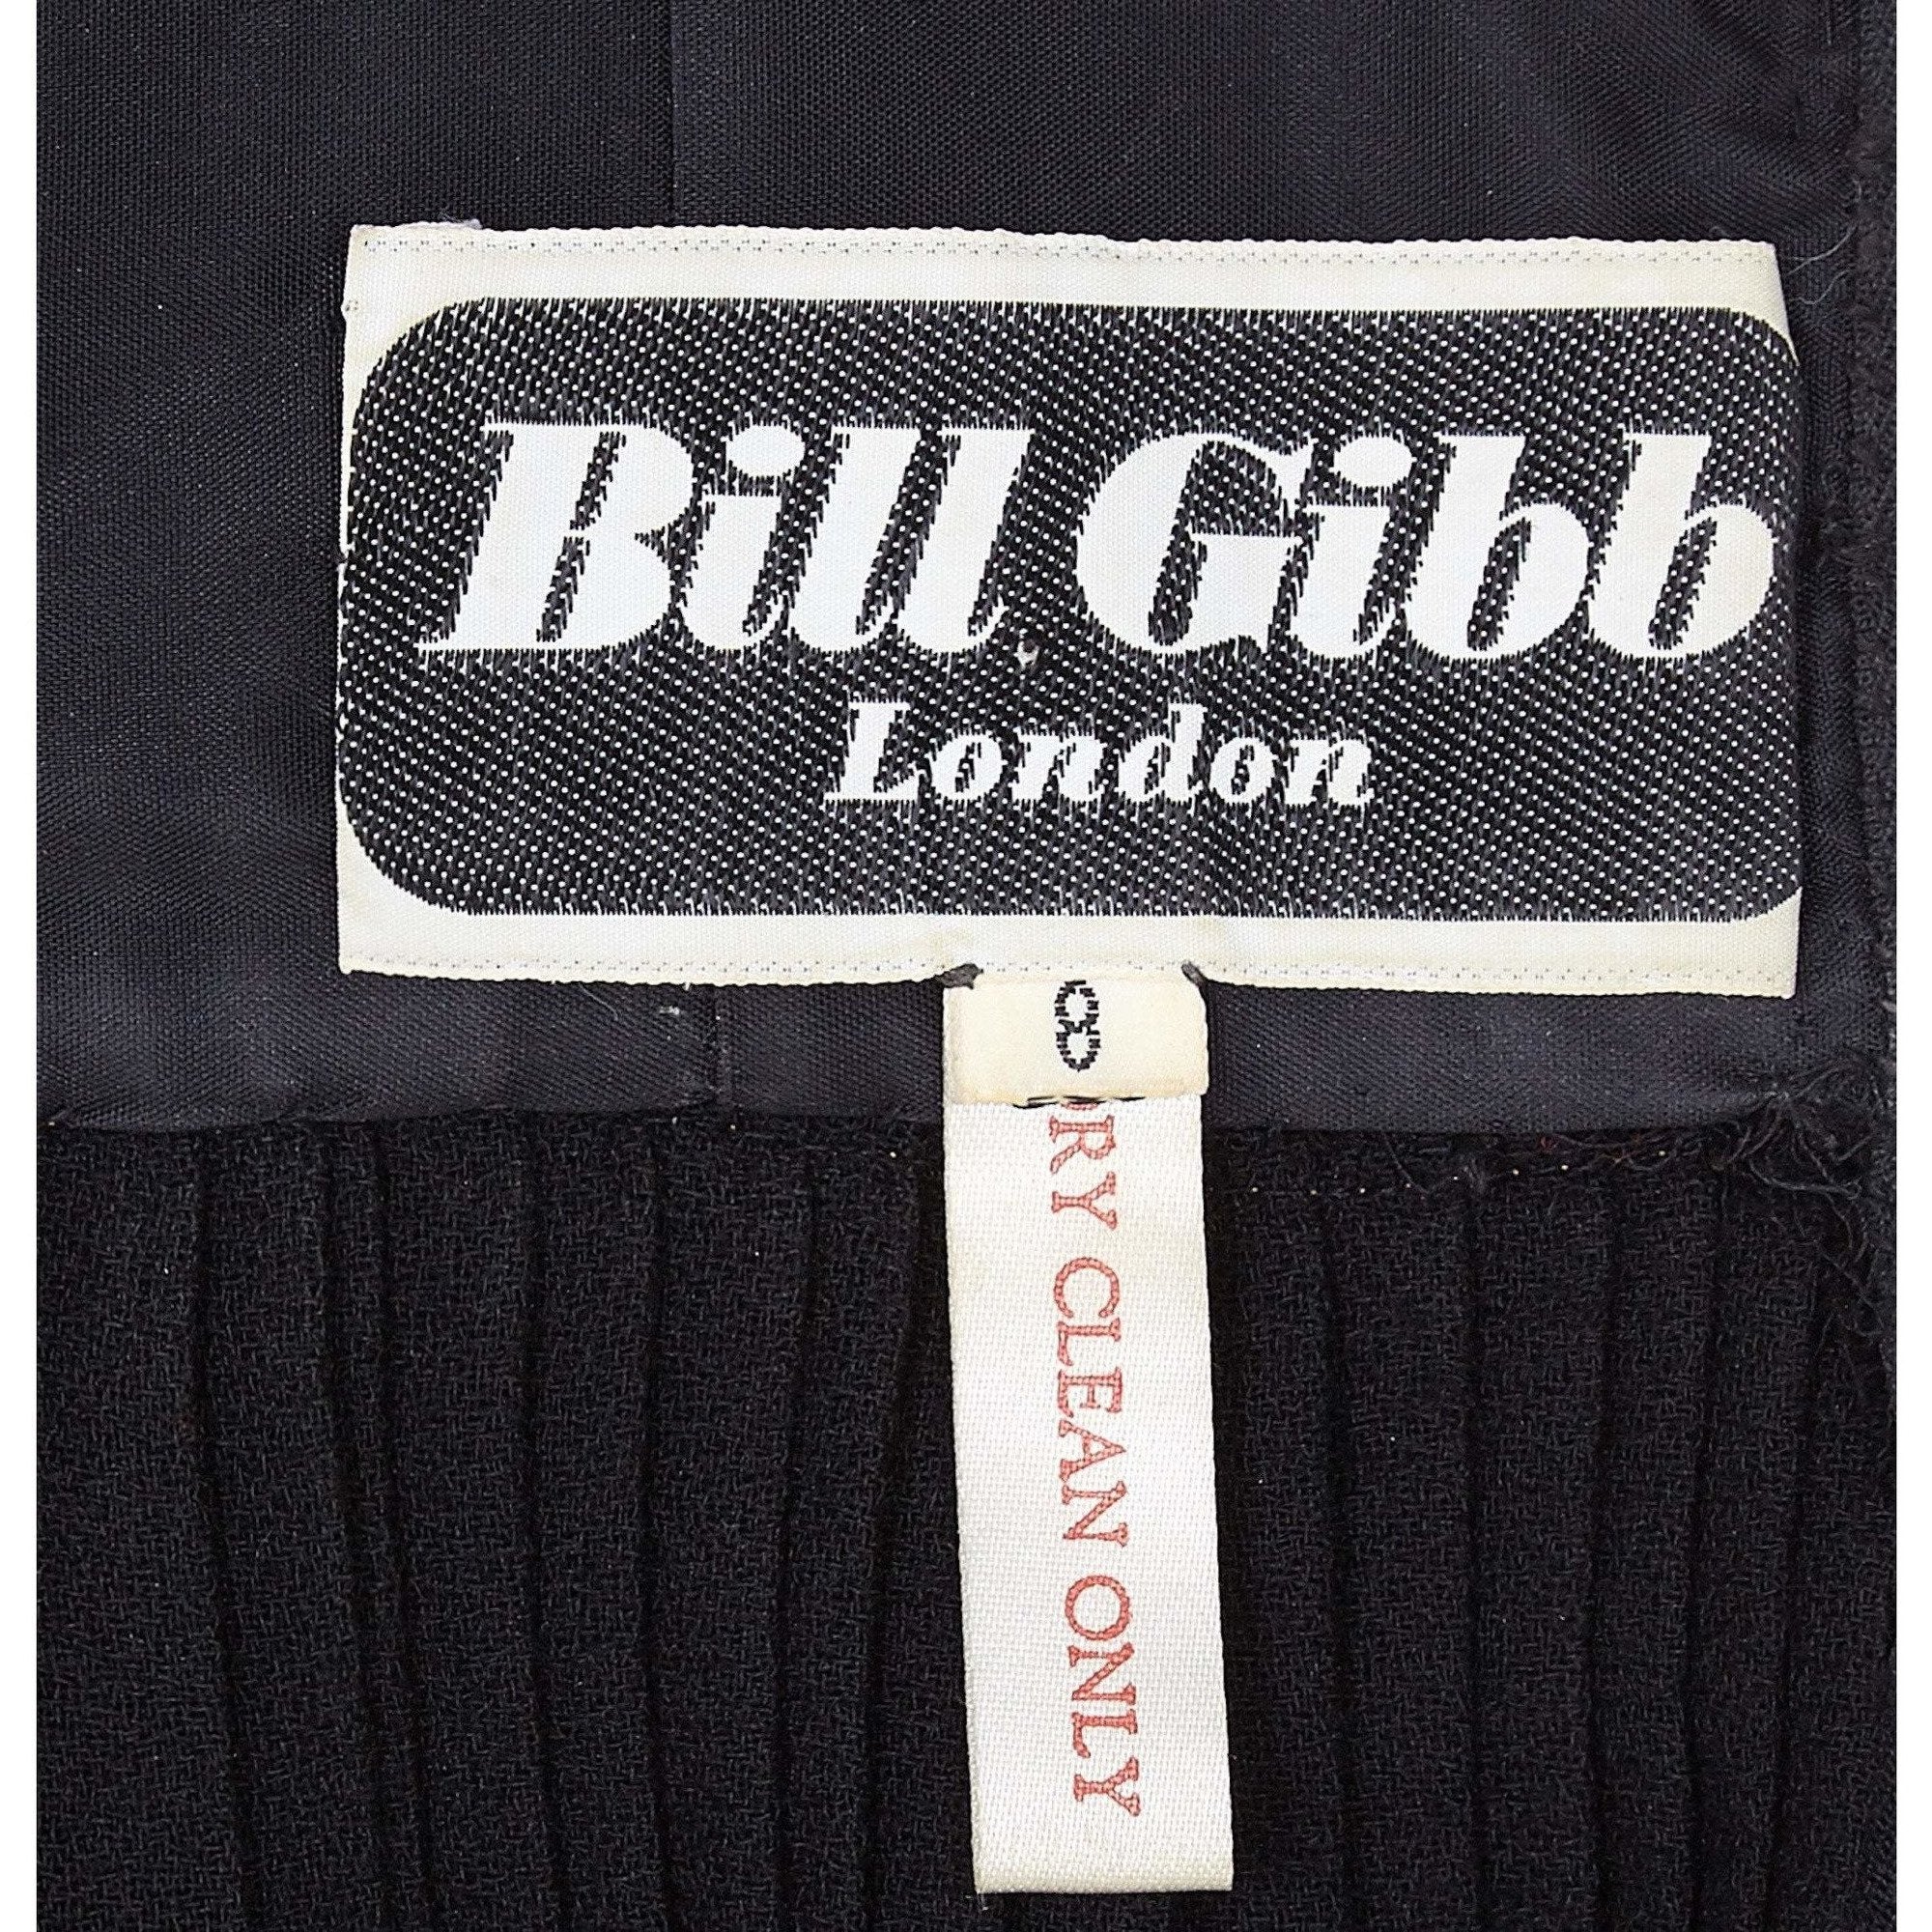 ARCHIVE - Rare Early Bill Gibb 1970s Renaissance Style Black Pleated D